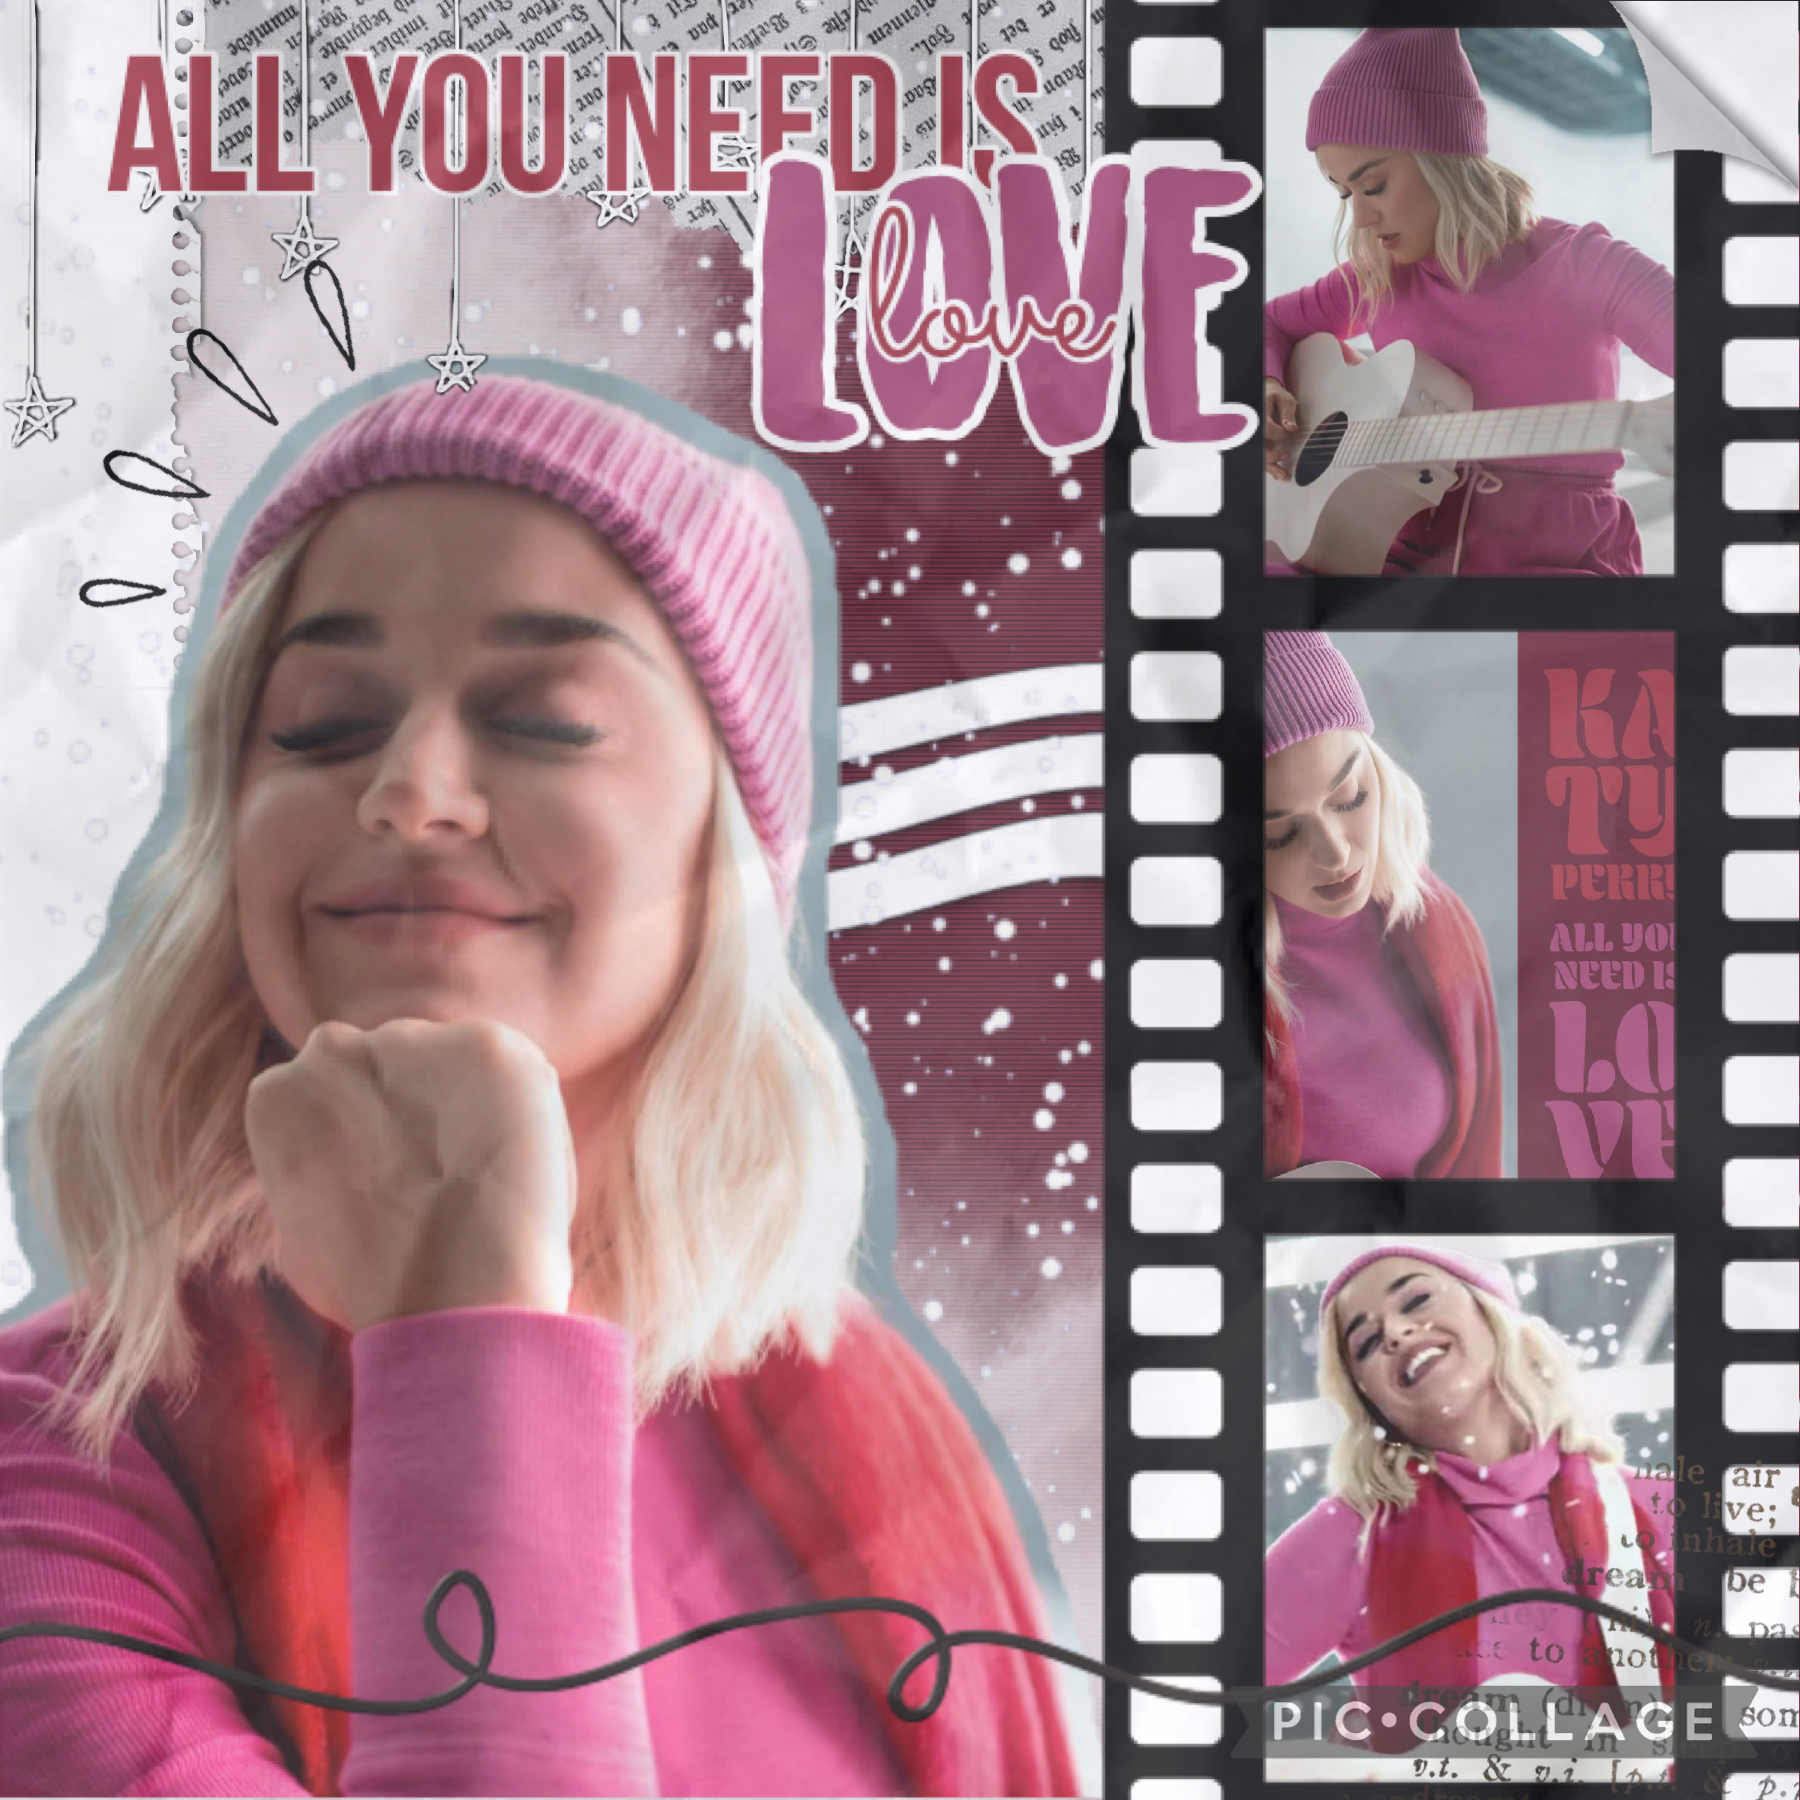 💗 TAP 💗
💗 Katy Perry Aesthetic!! 💗
💗 From Katy’s cover song of ‘All You Need Is Love’ 💗
💗 sorry for my break but im back now 😉 💗
💗 QOTD- favourite cover song? 💗
💗 AOTD- ‘Teenage Dirtbag’ by Cavetown and chloe moriondo 💗
💗 ilysm!! 💗